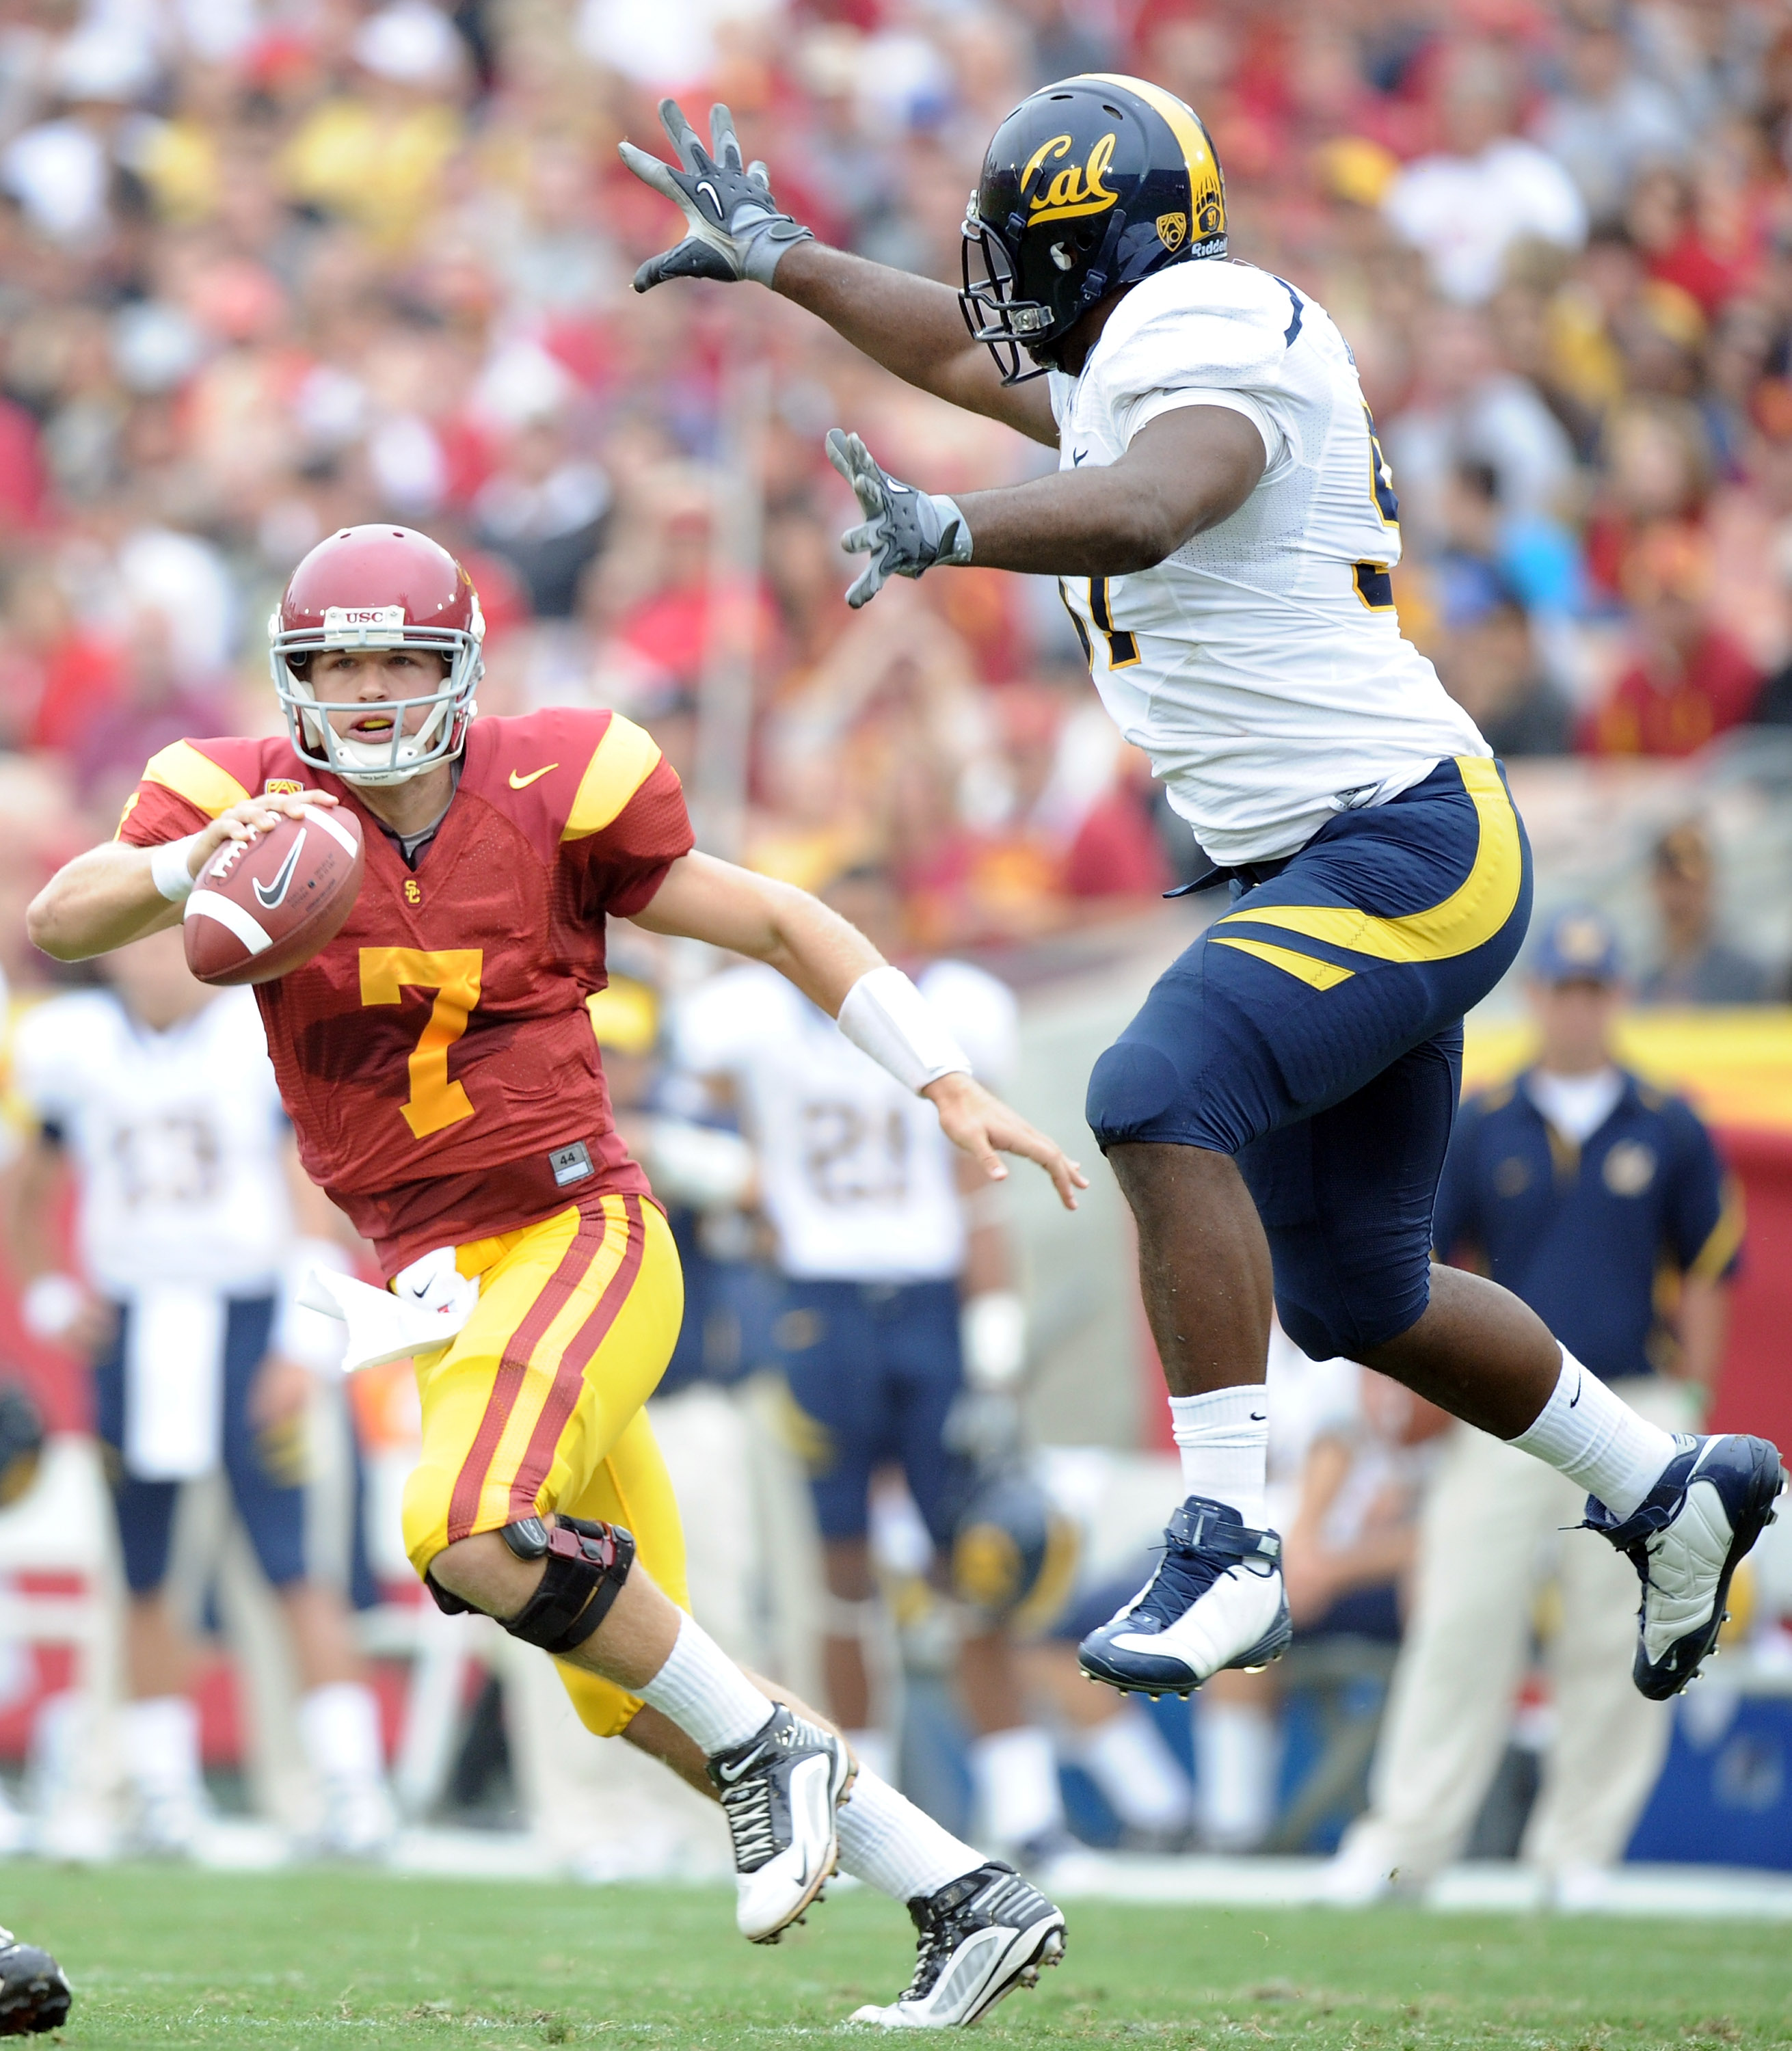 LOS ANGELES, CA - OCTOBER 16:  Matt Barkley #7 of the USC Trojans eludes the rush of Cameron Jordan #97 of the California Golden Bears during the first quarter at Los Angeles Memorial Coliseum on October 16, 2010 in Los Angeles, California.  (Photo by Har